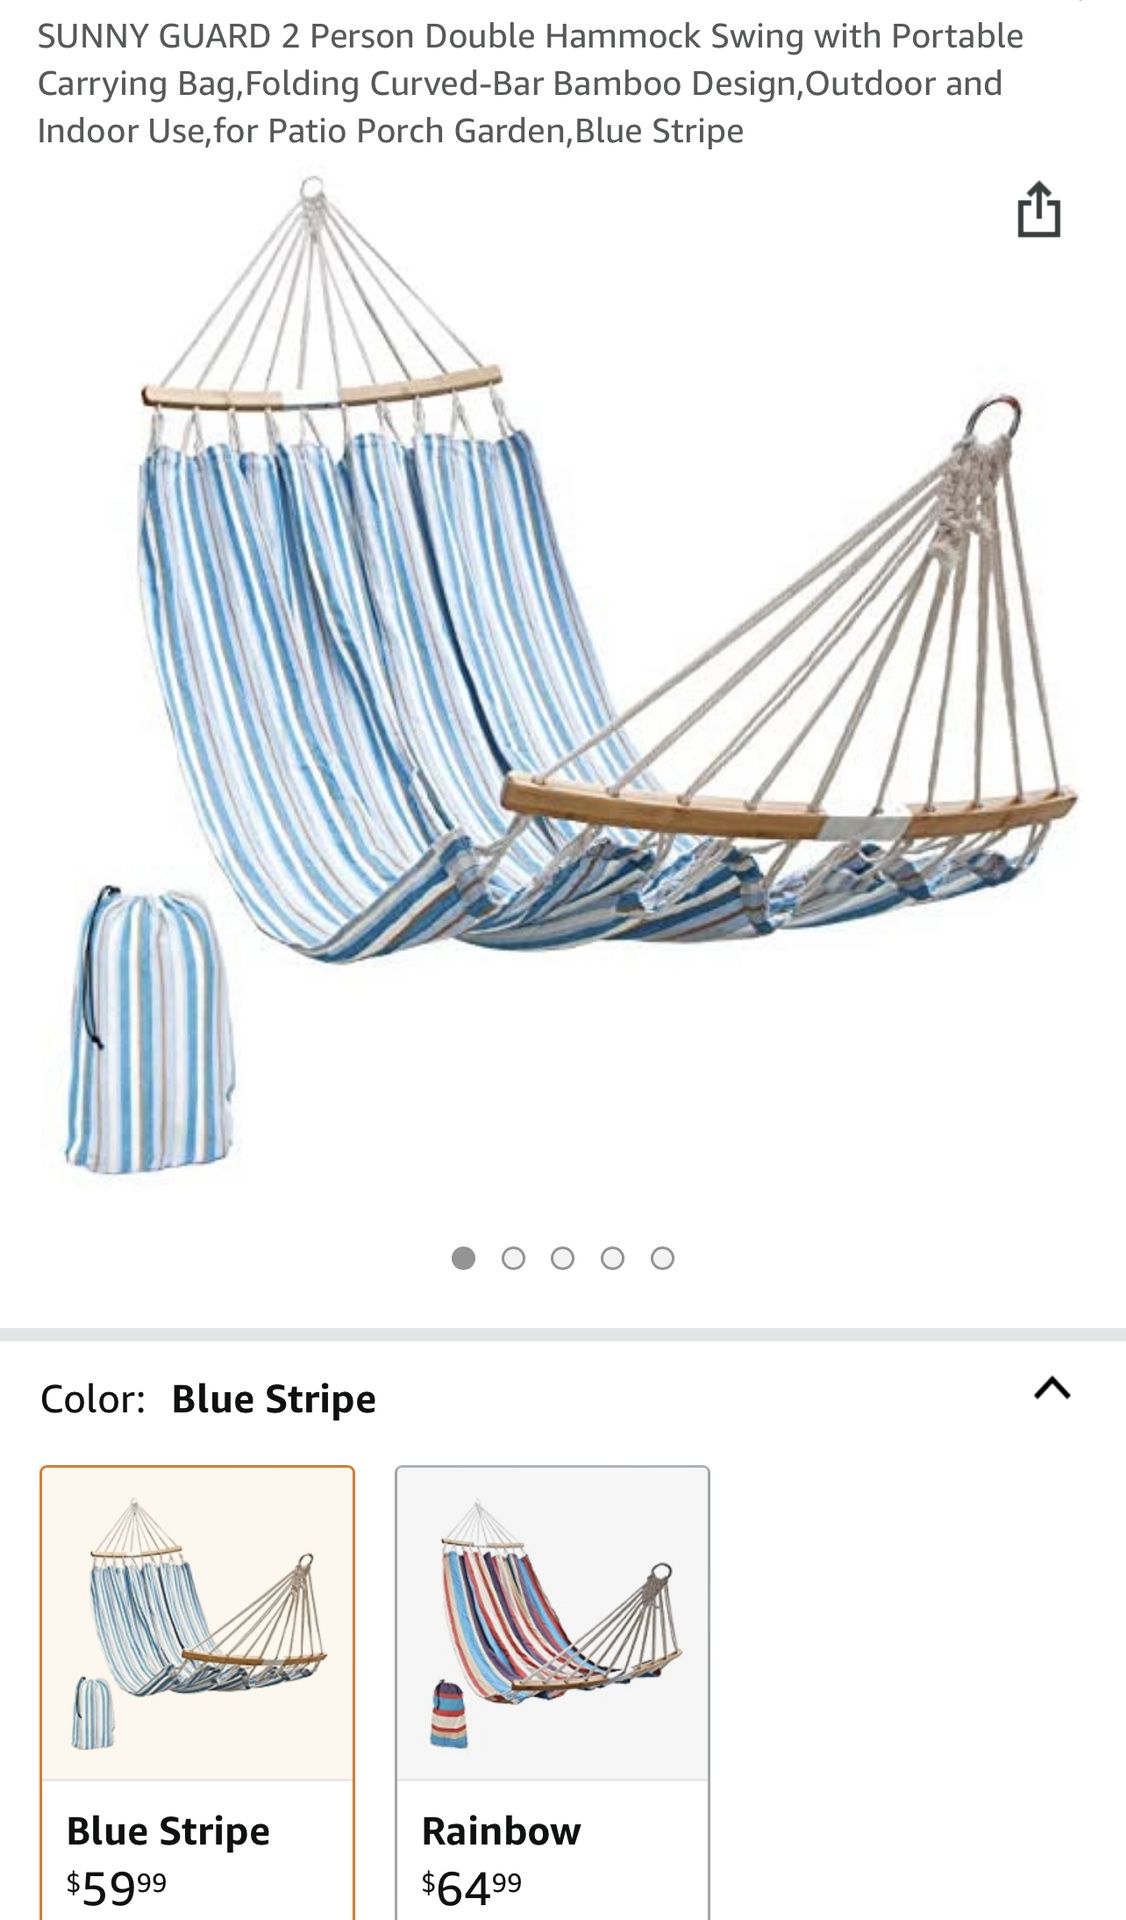 2 Person Double Hammock Swing w/Portable Carrying Bag-Folding Curved/Bar Bamboo Design-Outdoor & Indoor for Patio/Porch/Garden-Rainbow OR Blue Stripe 